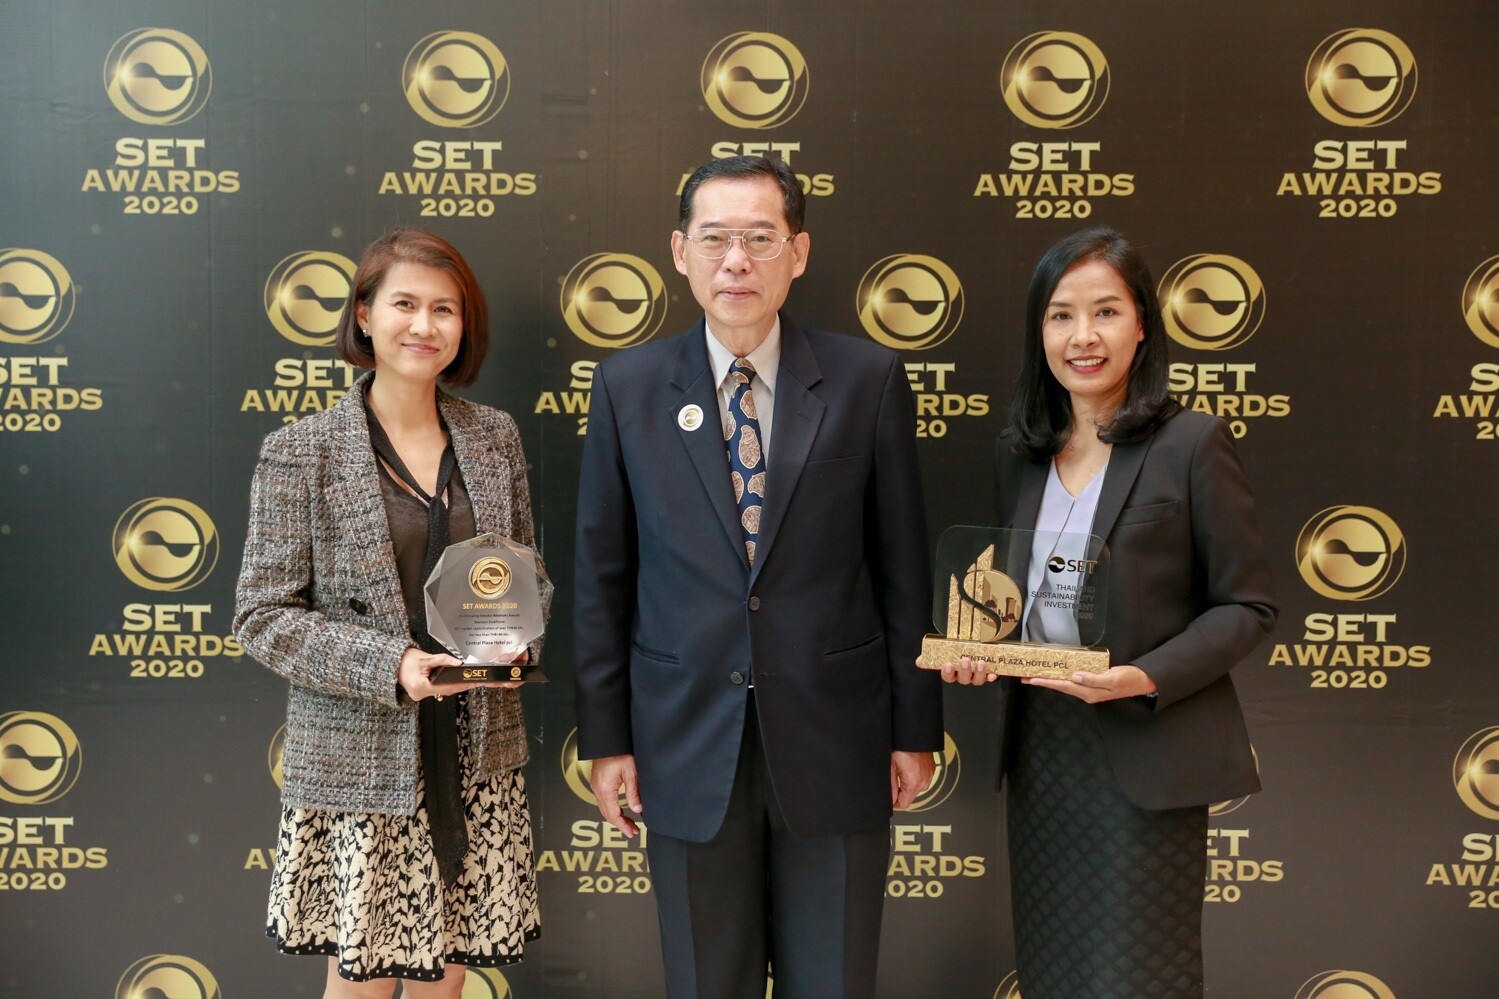 Centara Recognised by SET for Sustainability Investment Performance, Investor Relations Excellence in 2020